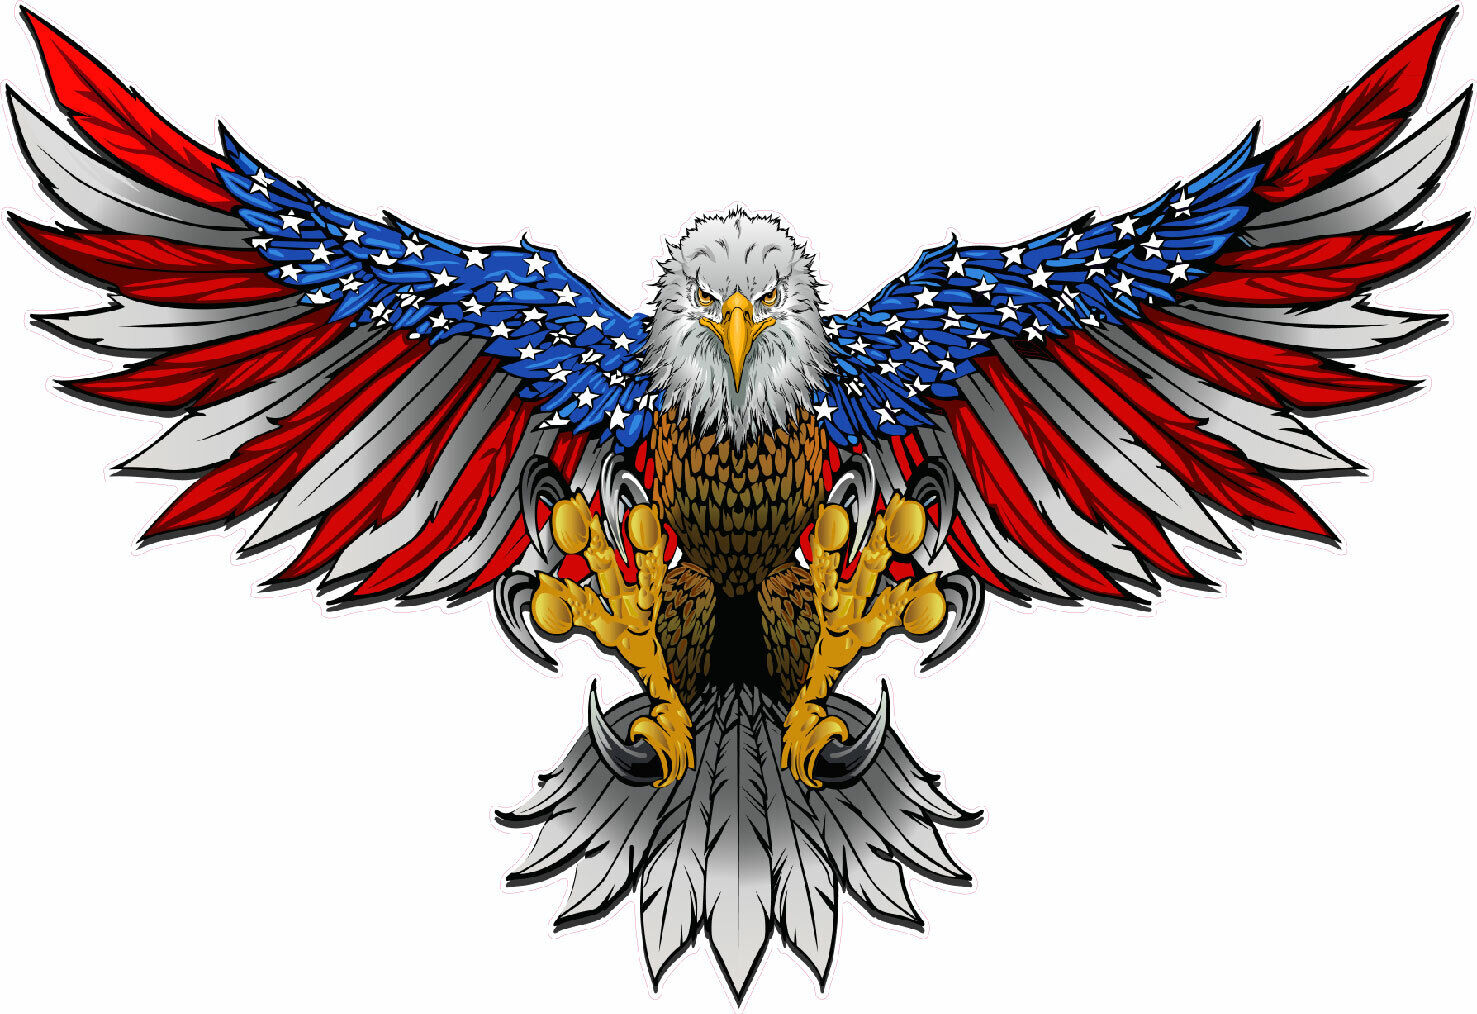 American Flag Attack Bald Eagle Wings Decal 12\